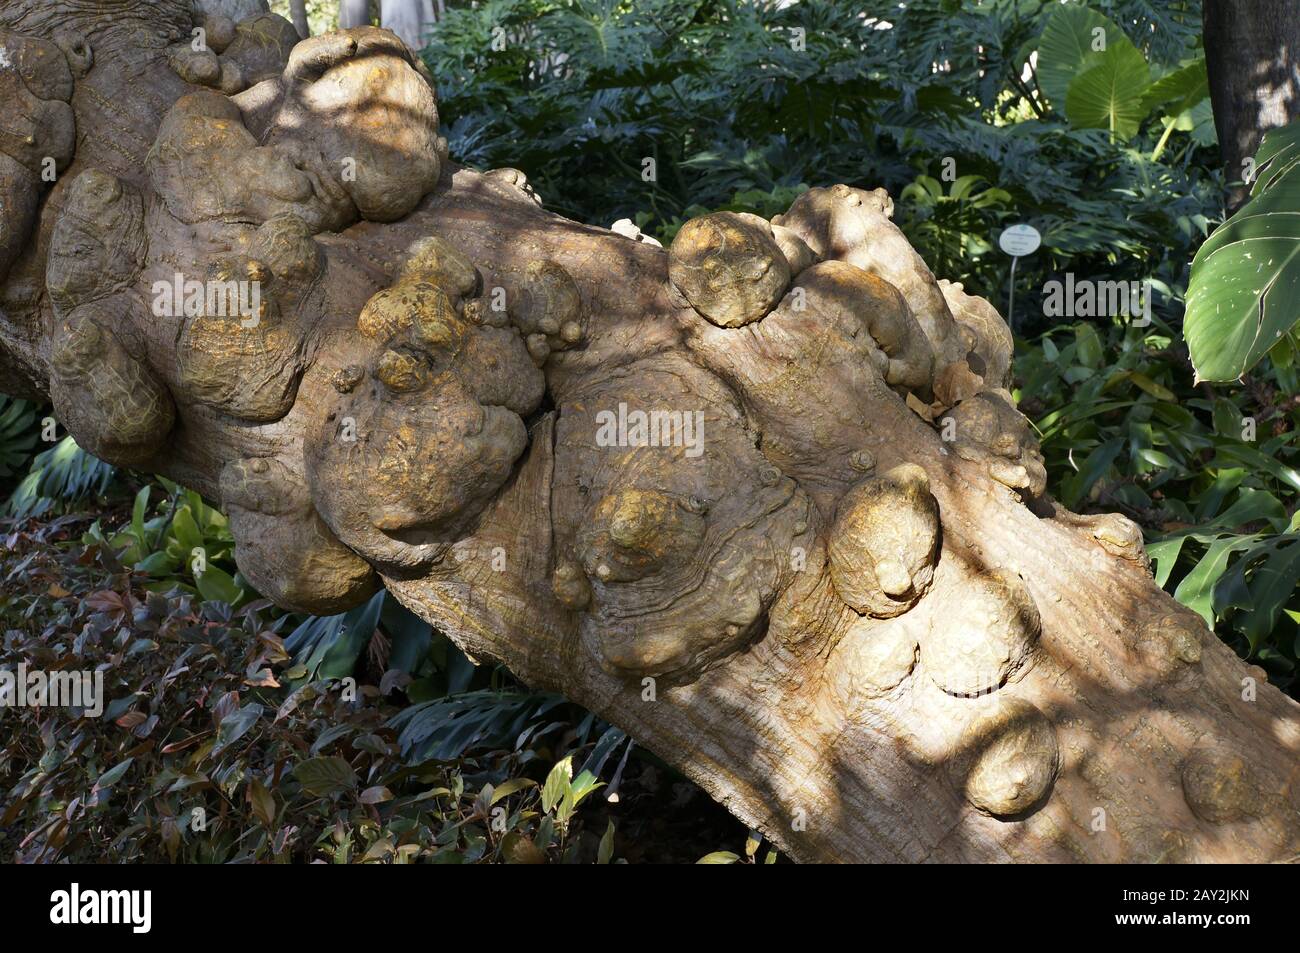 trunk of a coral tree Stock Photo